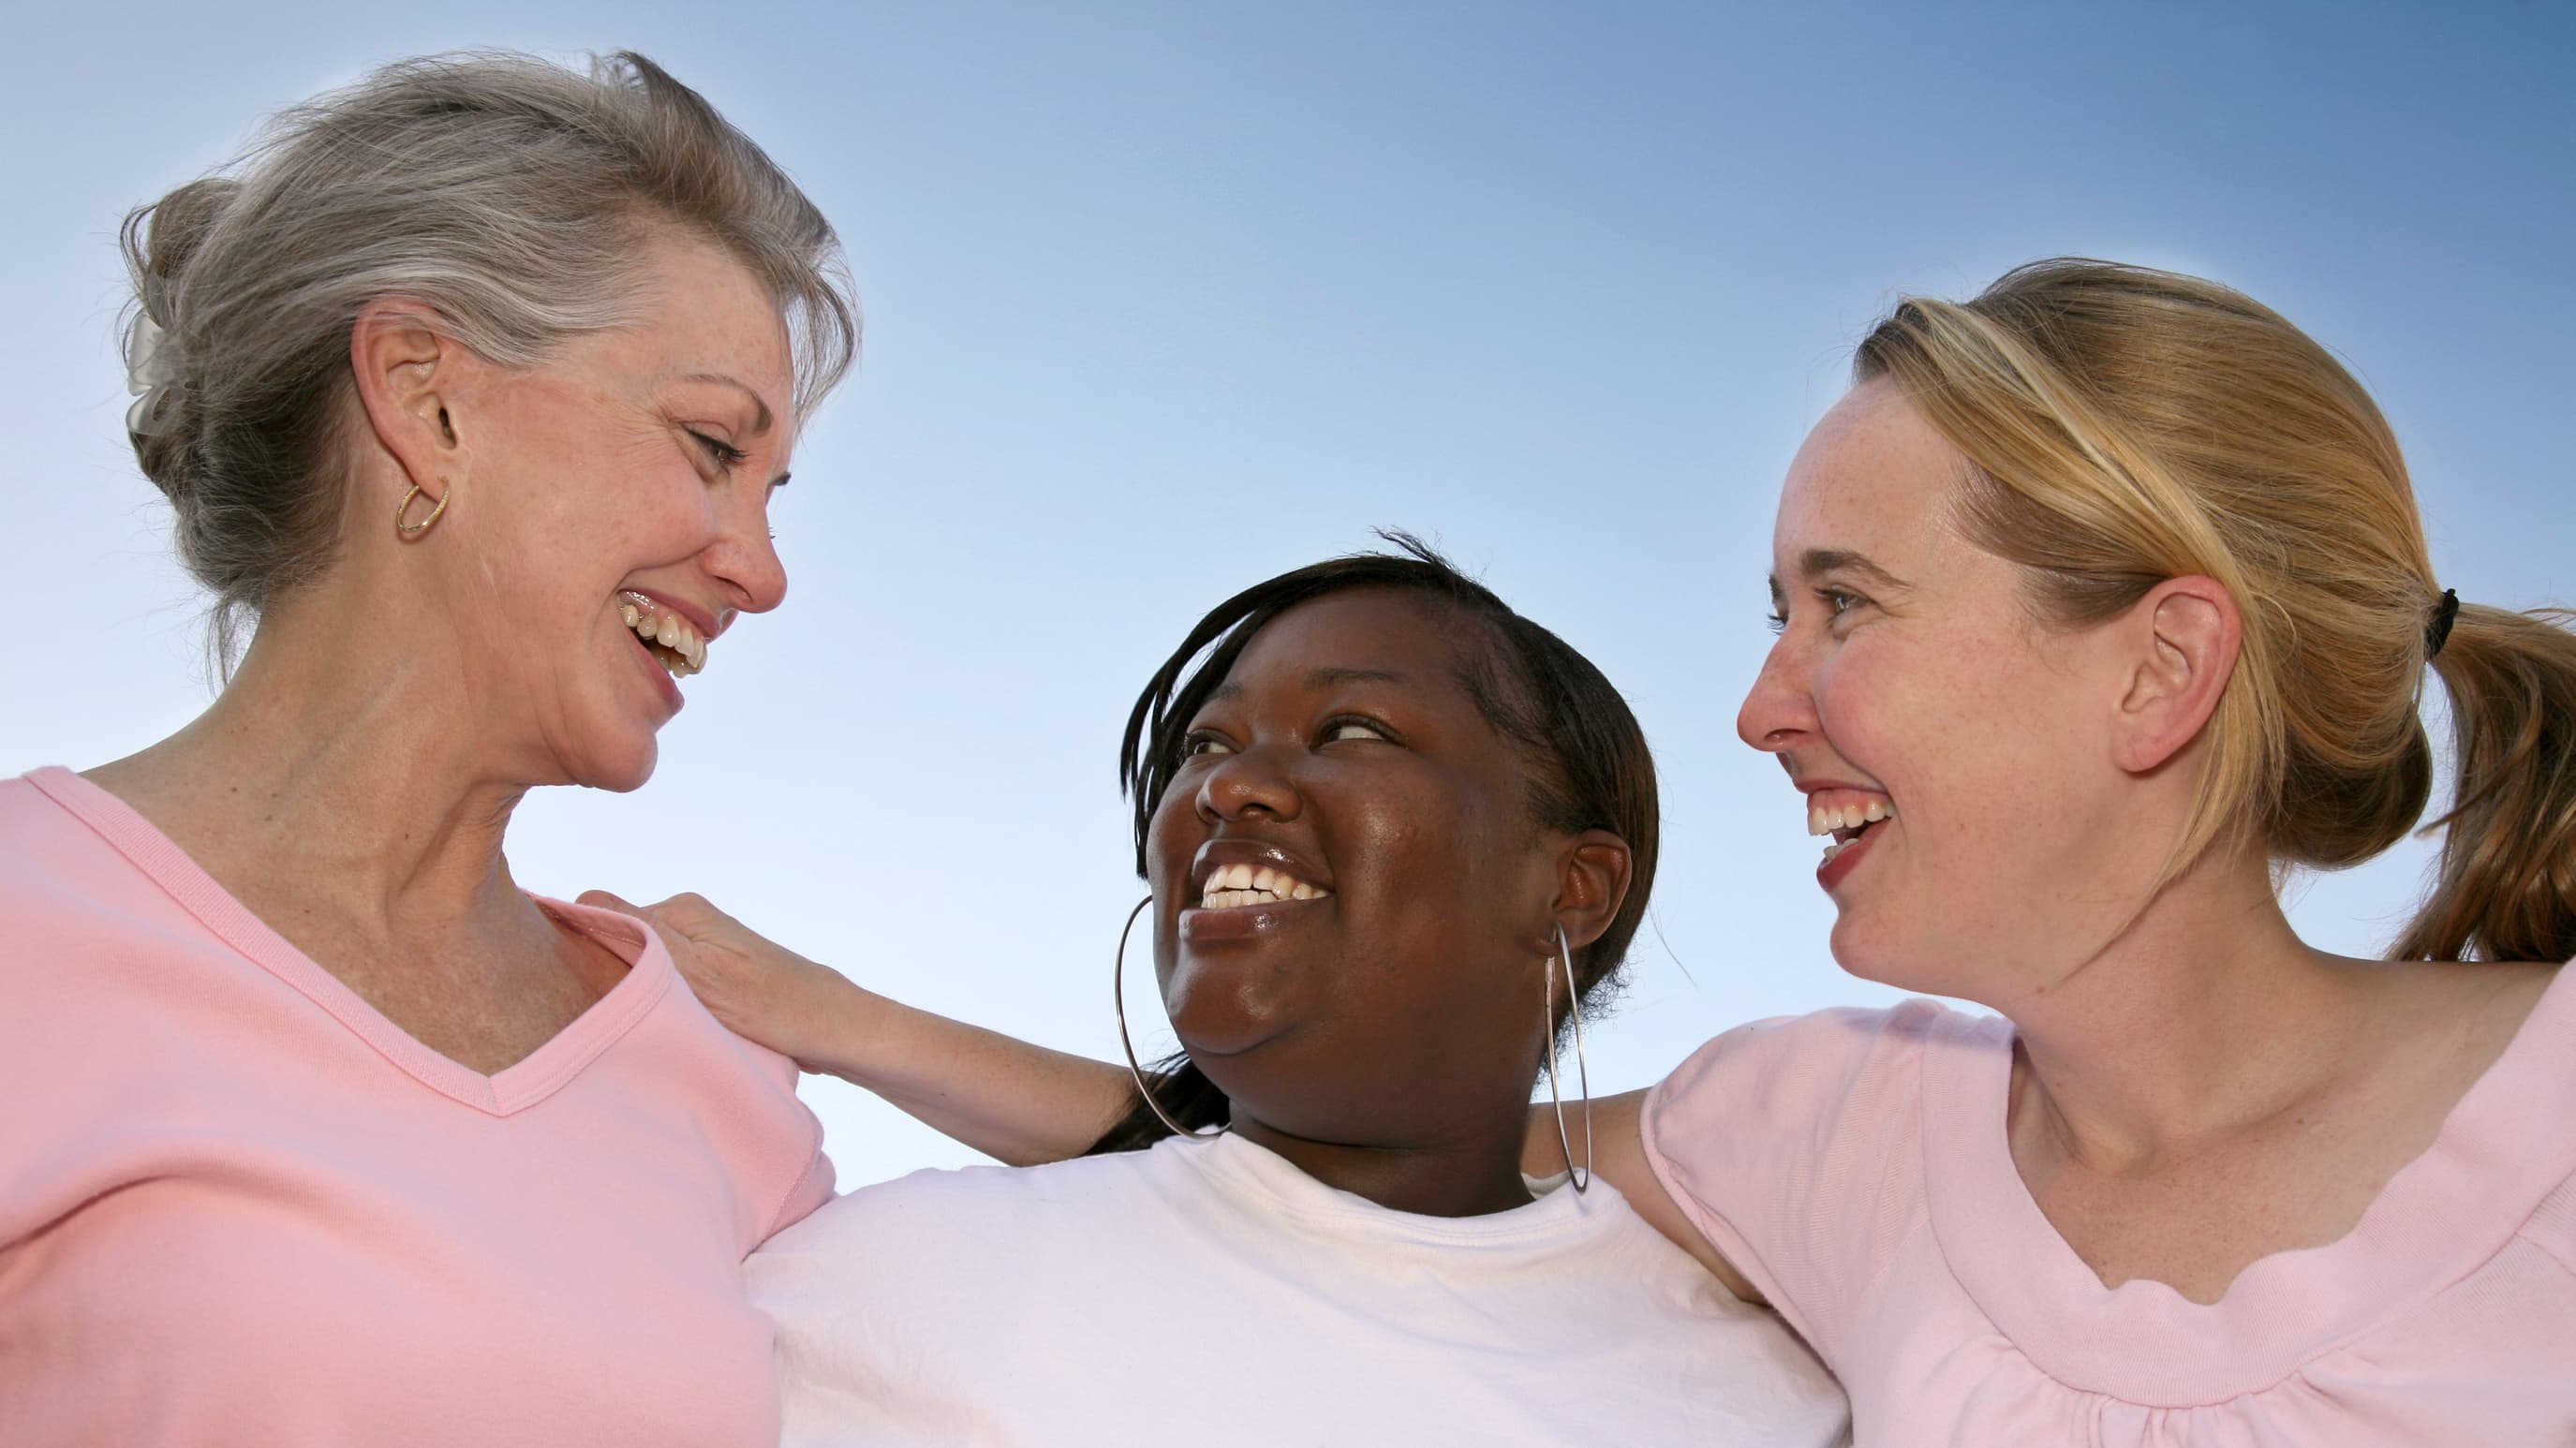 Three smiling women who could be cancer survivors lock arms.